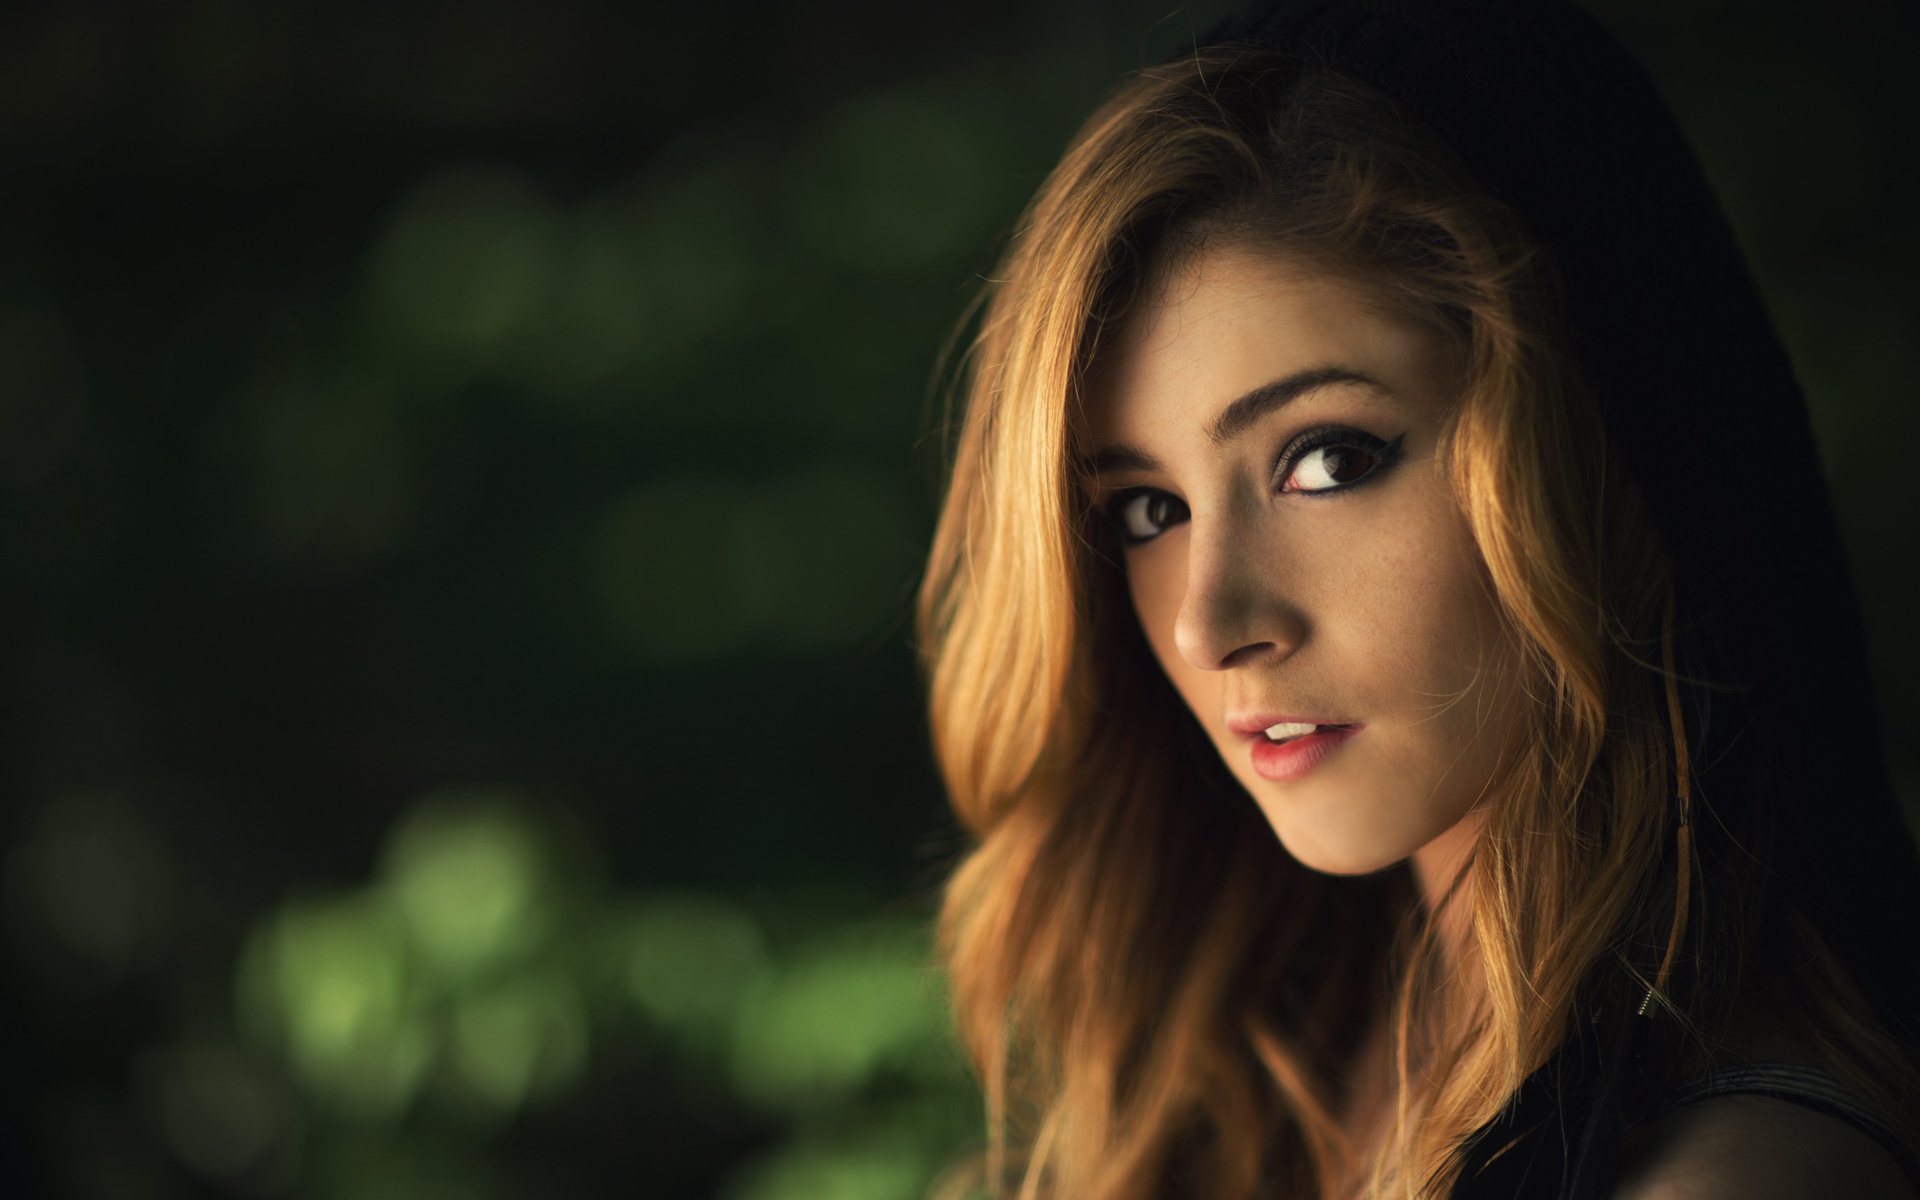 chrissy costanza hd nice wallpapers free